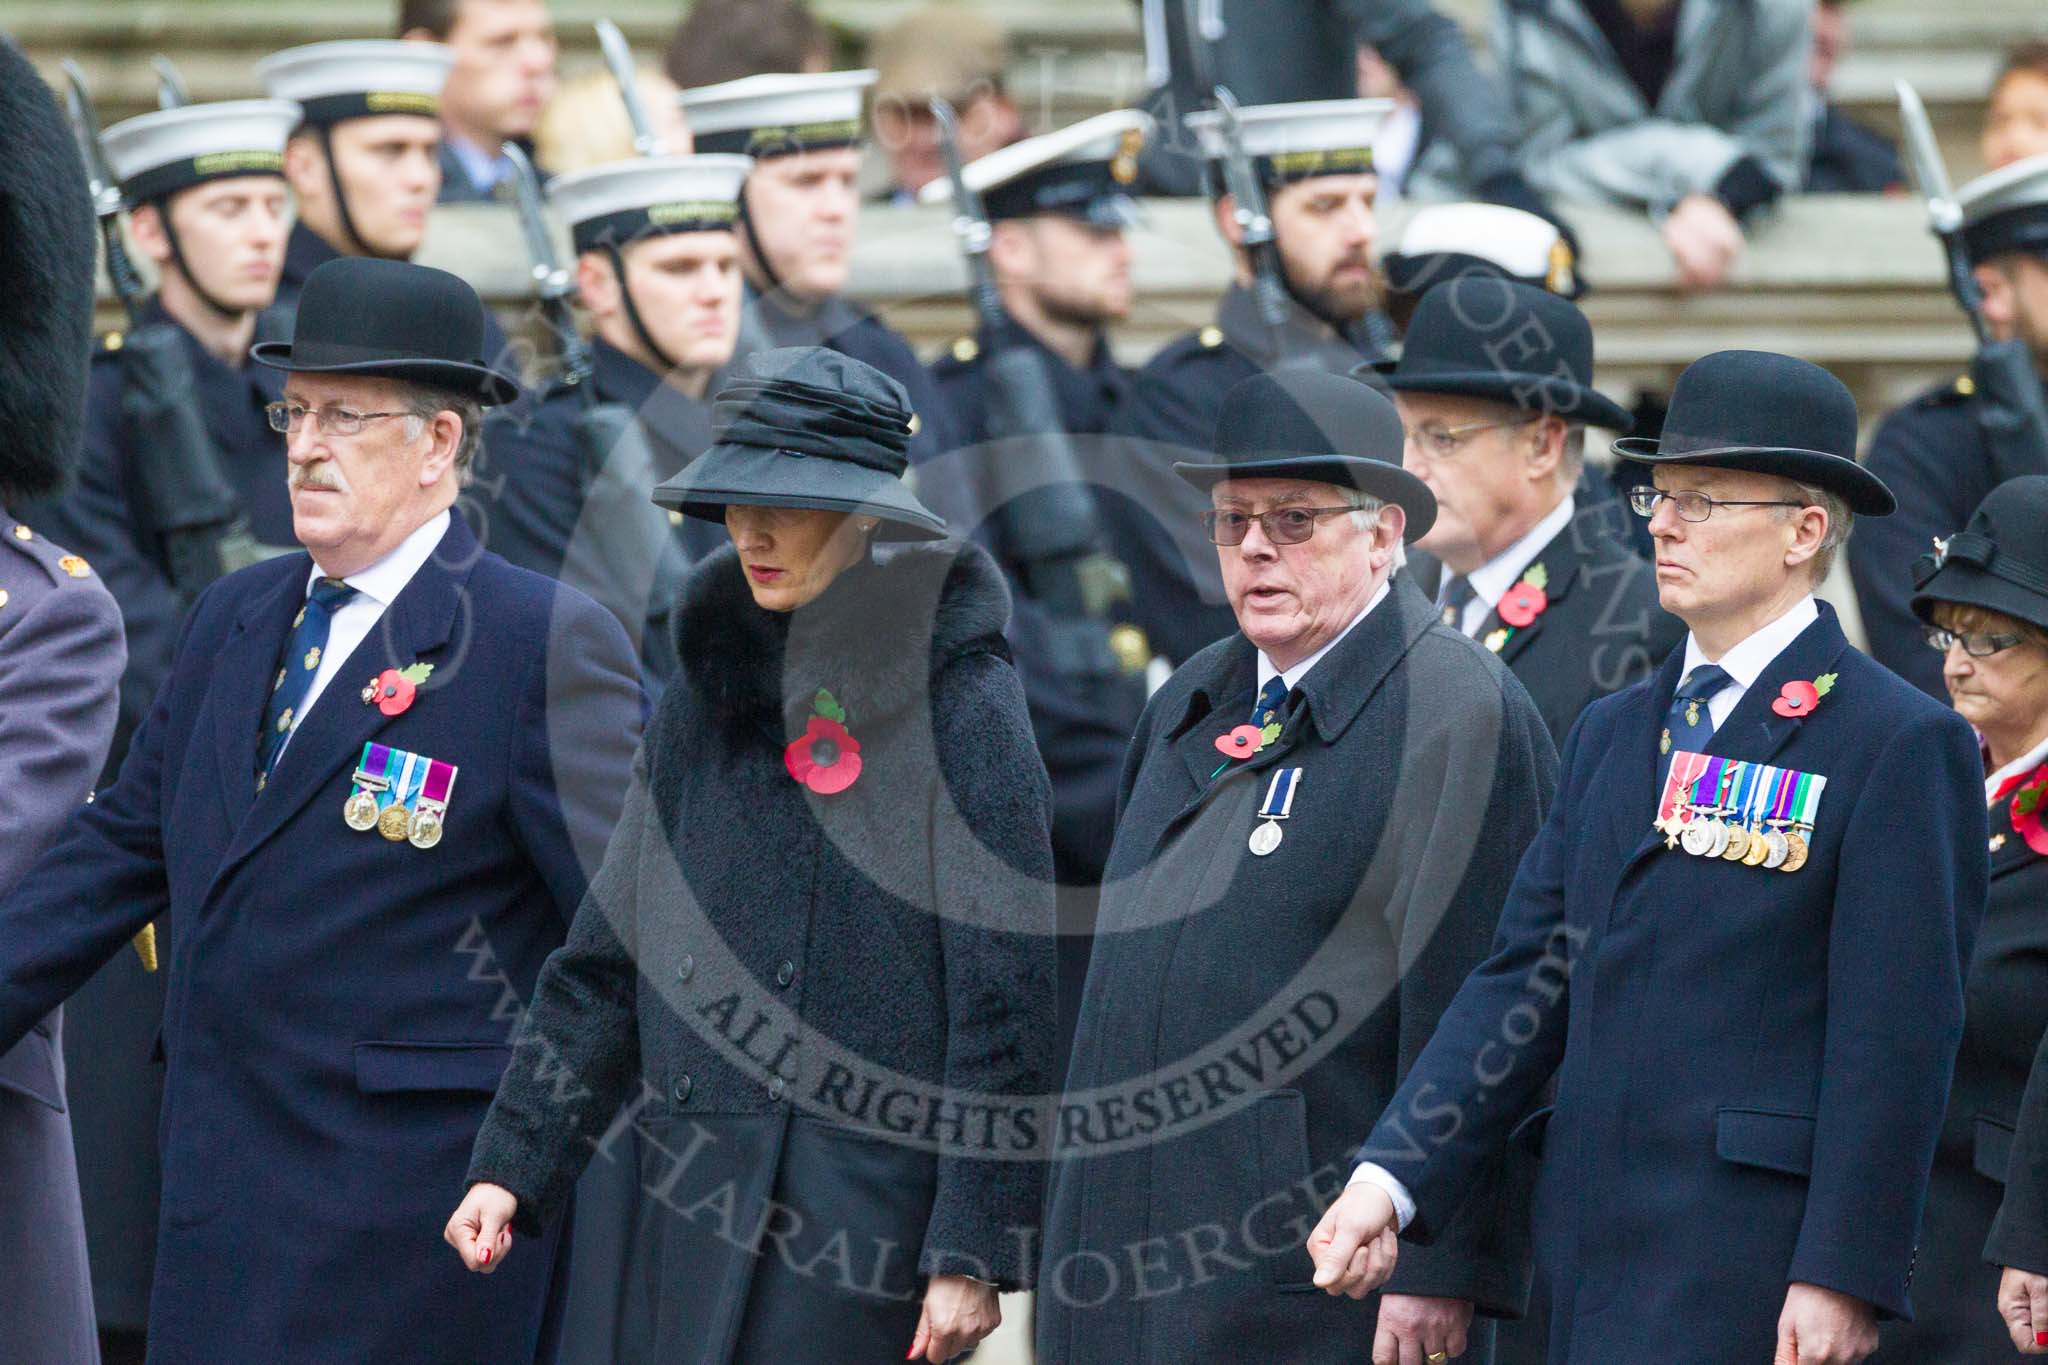 Remembrance Sunday at the Cenotaph 2015: Group B1, Reconnaissance Corps (Anniversary).
Cenotaph, Whitehall, London SW1,
London,
Greater London,
United Kingdom,
on 08 November 2015 at 11:36, image #12